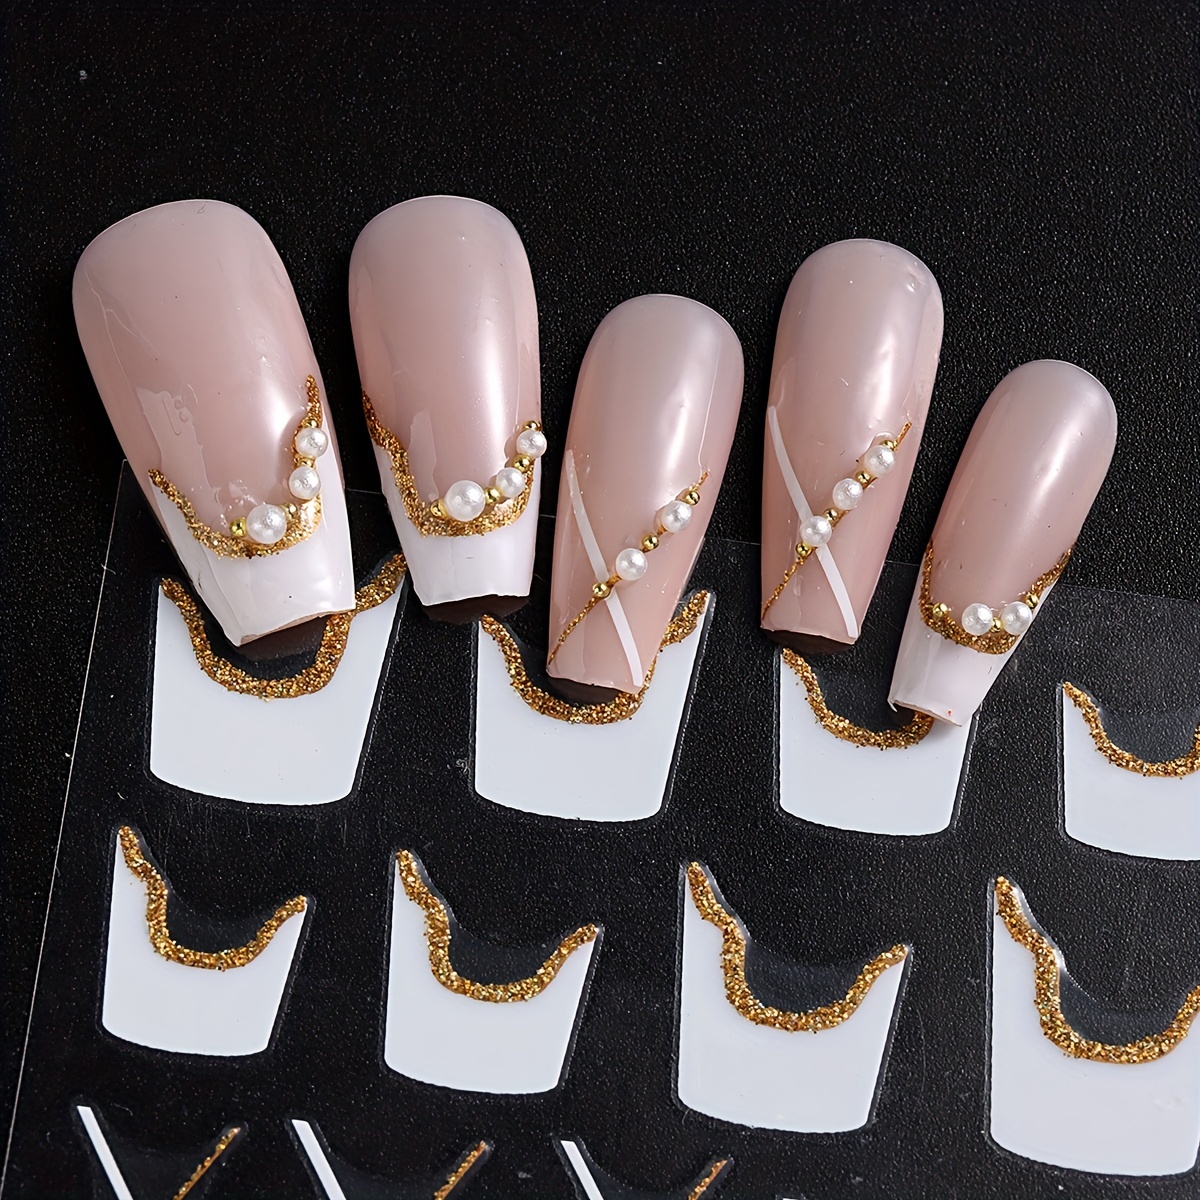 3D Nail Stickers Reflective Glitter Gold Silver Line French Tips